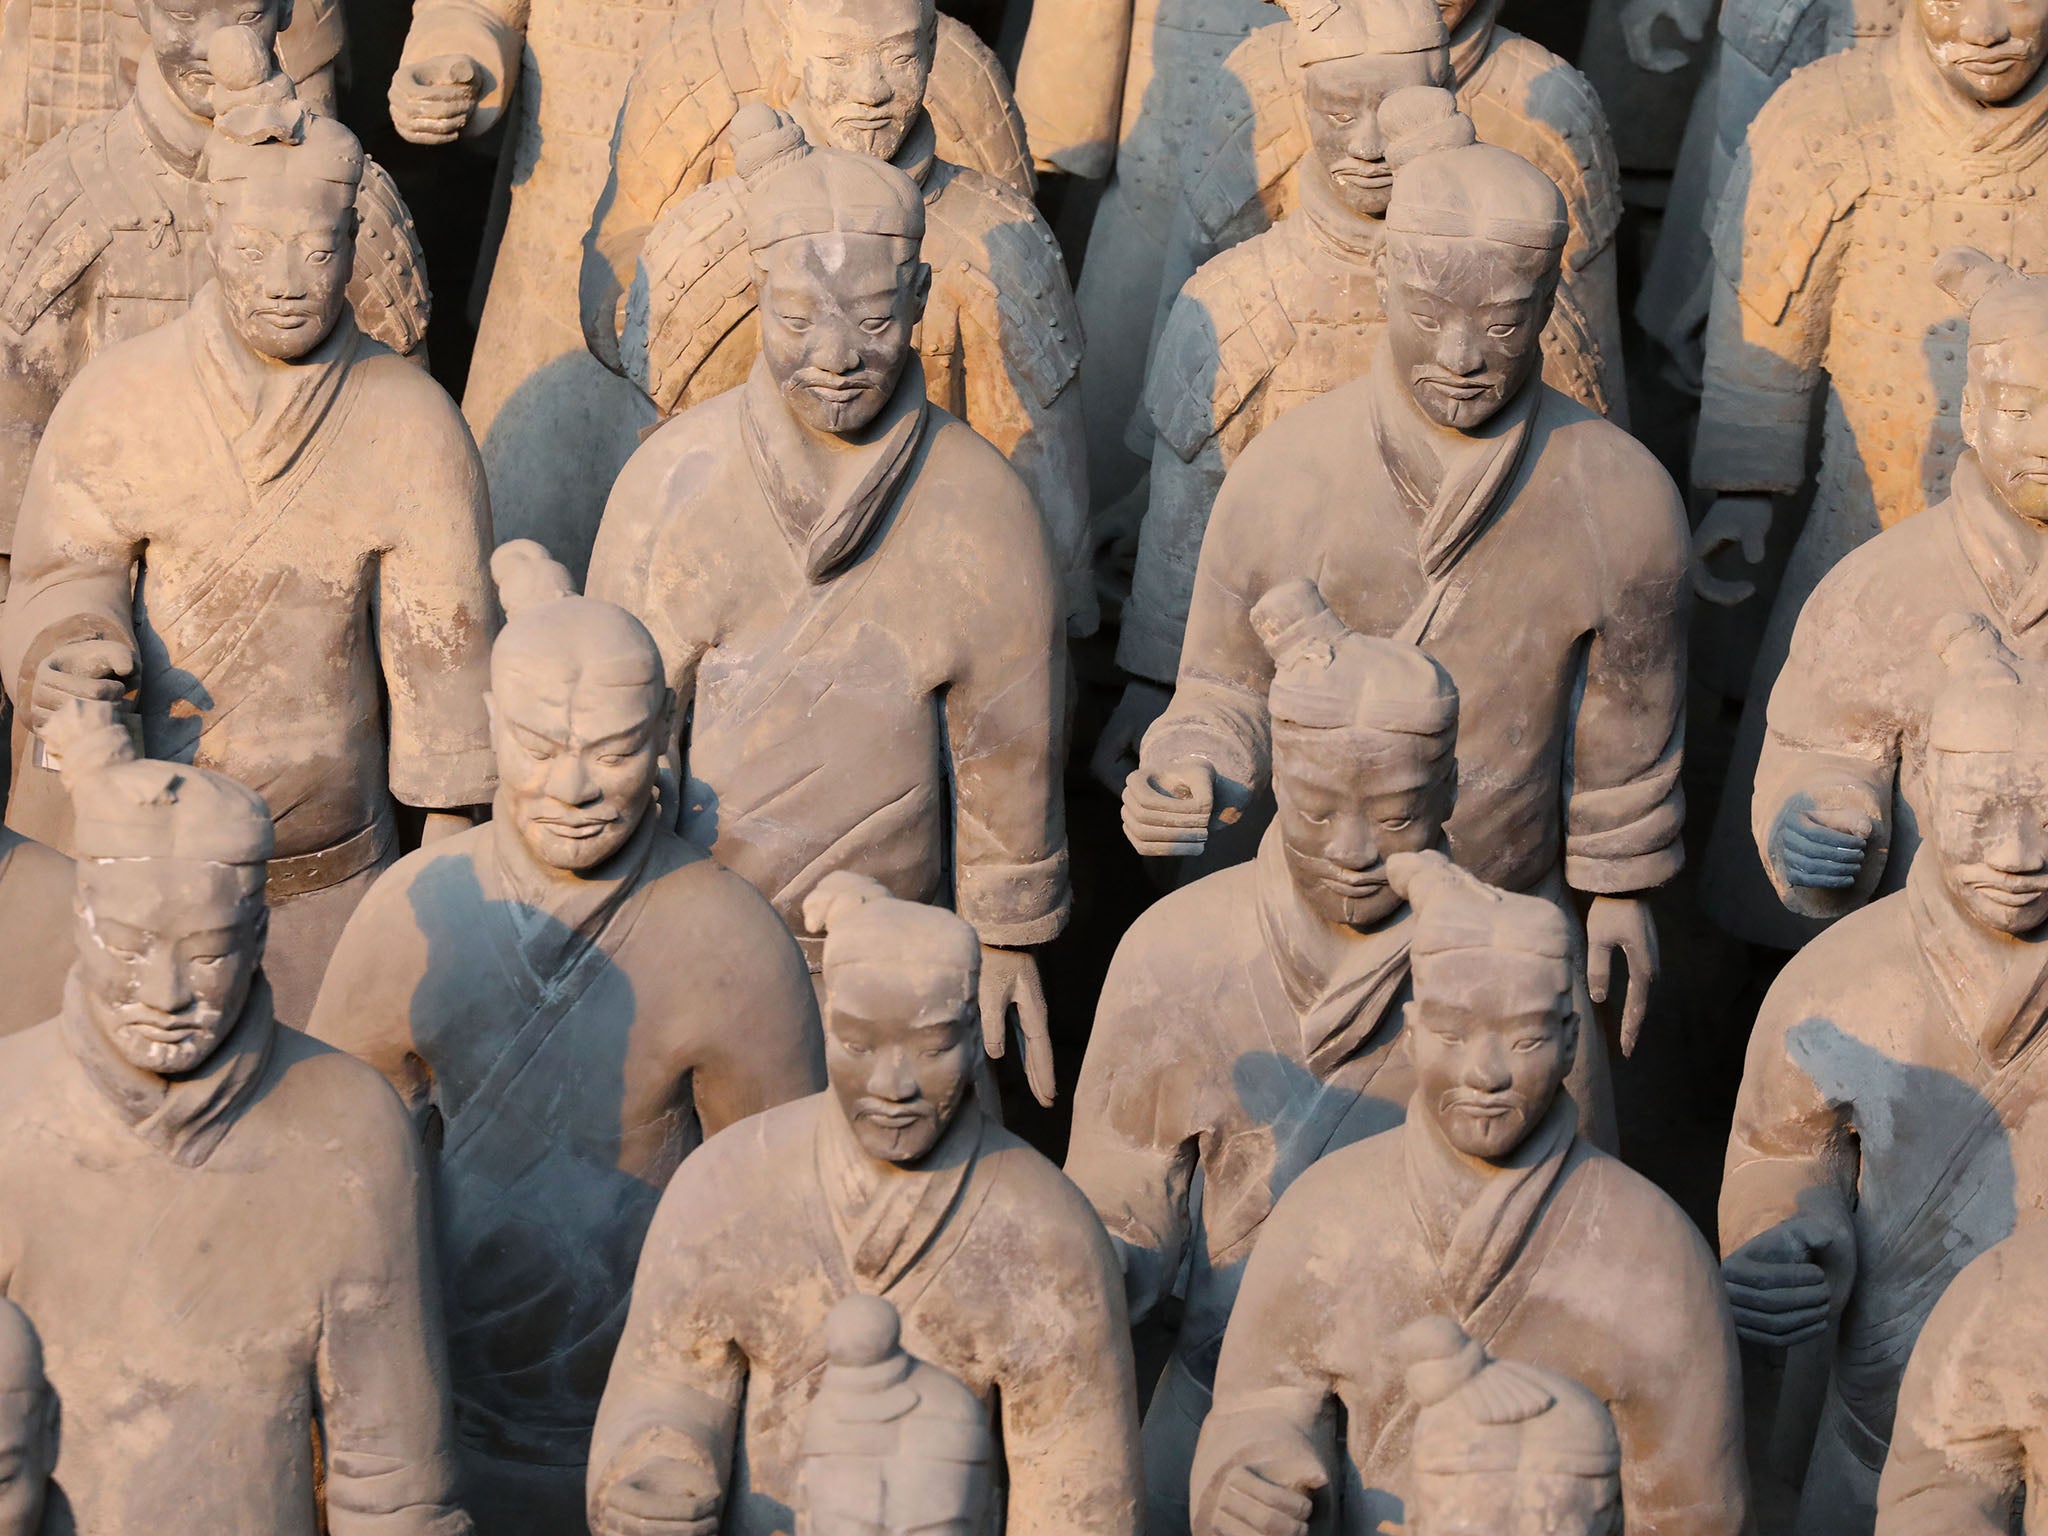 China's famous terracotta warriors which were discovered on 29 March 1974